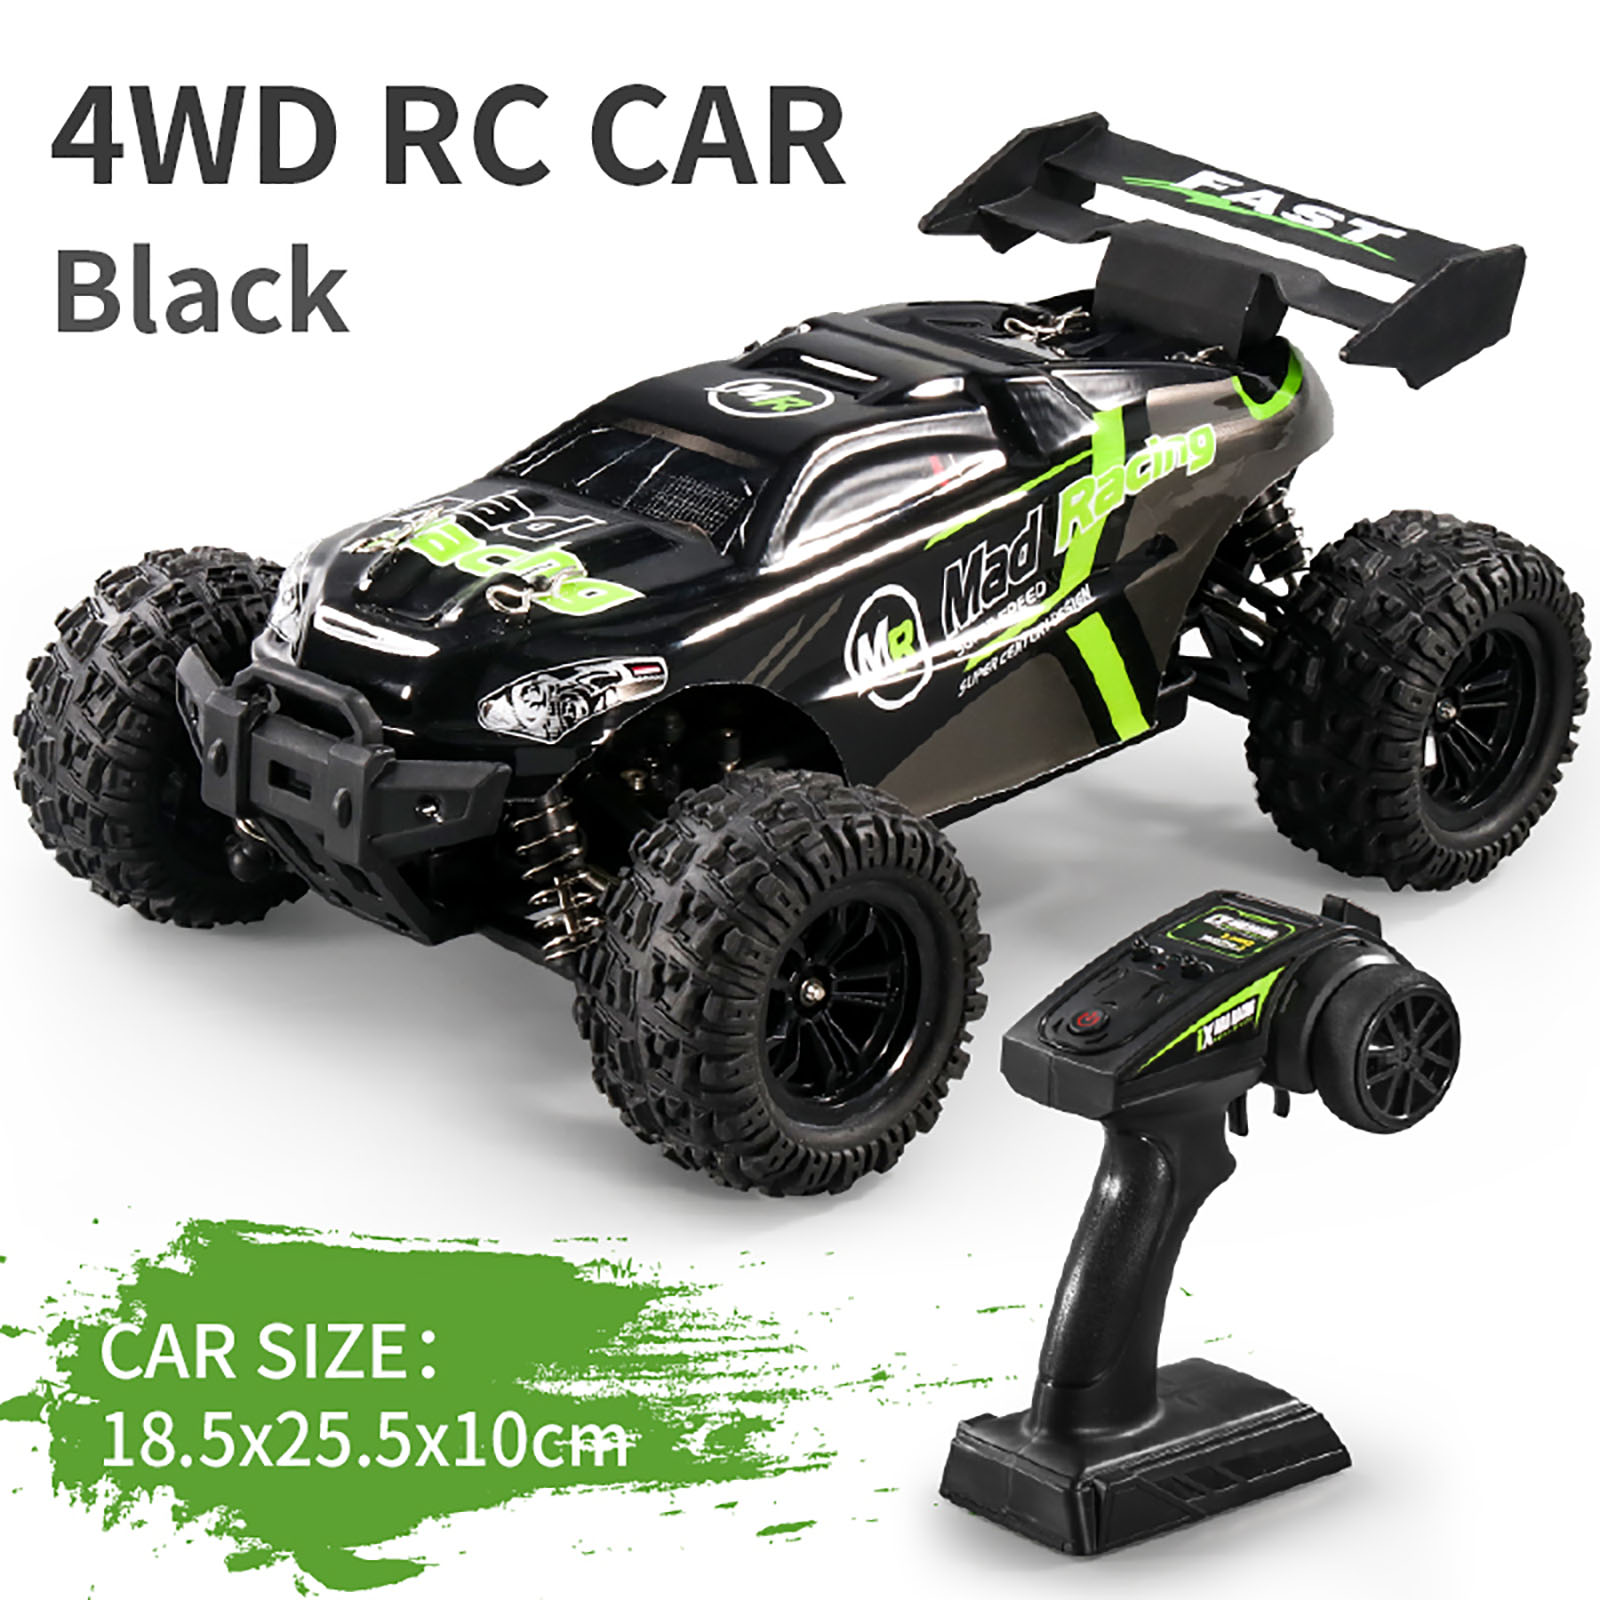 1:18 Remote Control Car 2.4G 4WD 35+km/H High Speed Off-Road Vehicle Remote Control Car